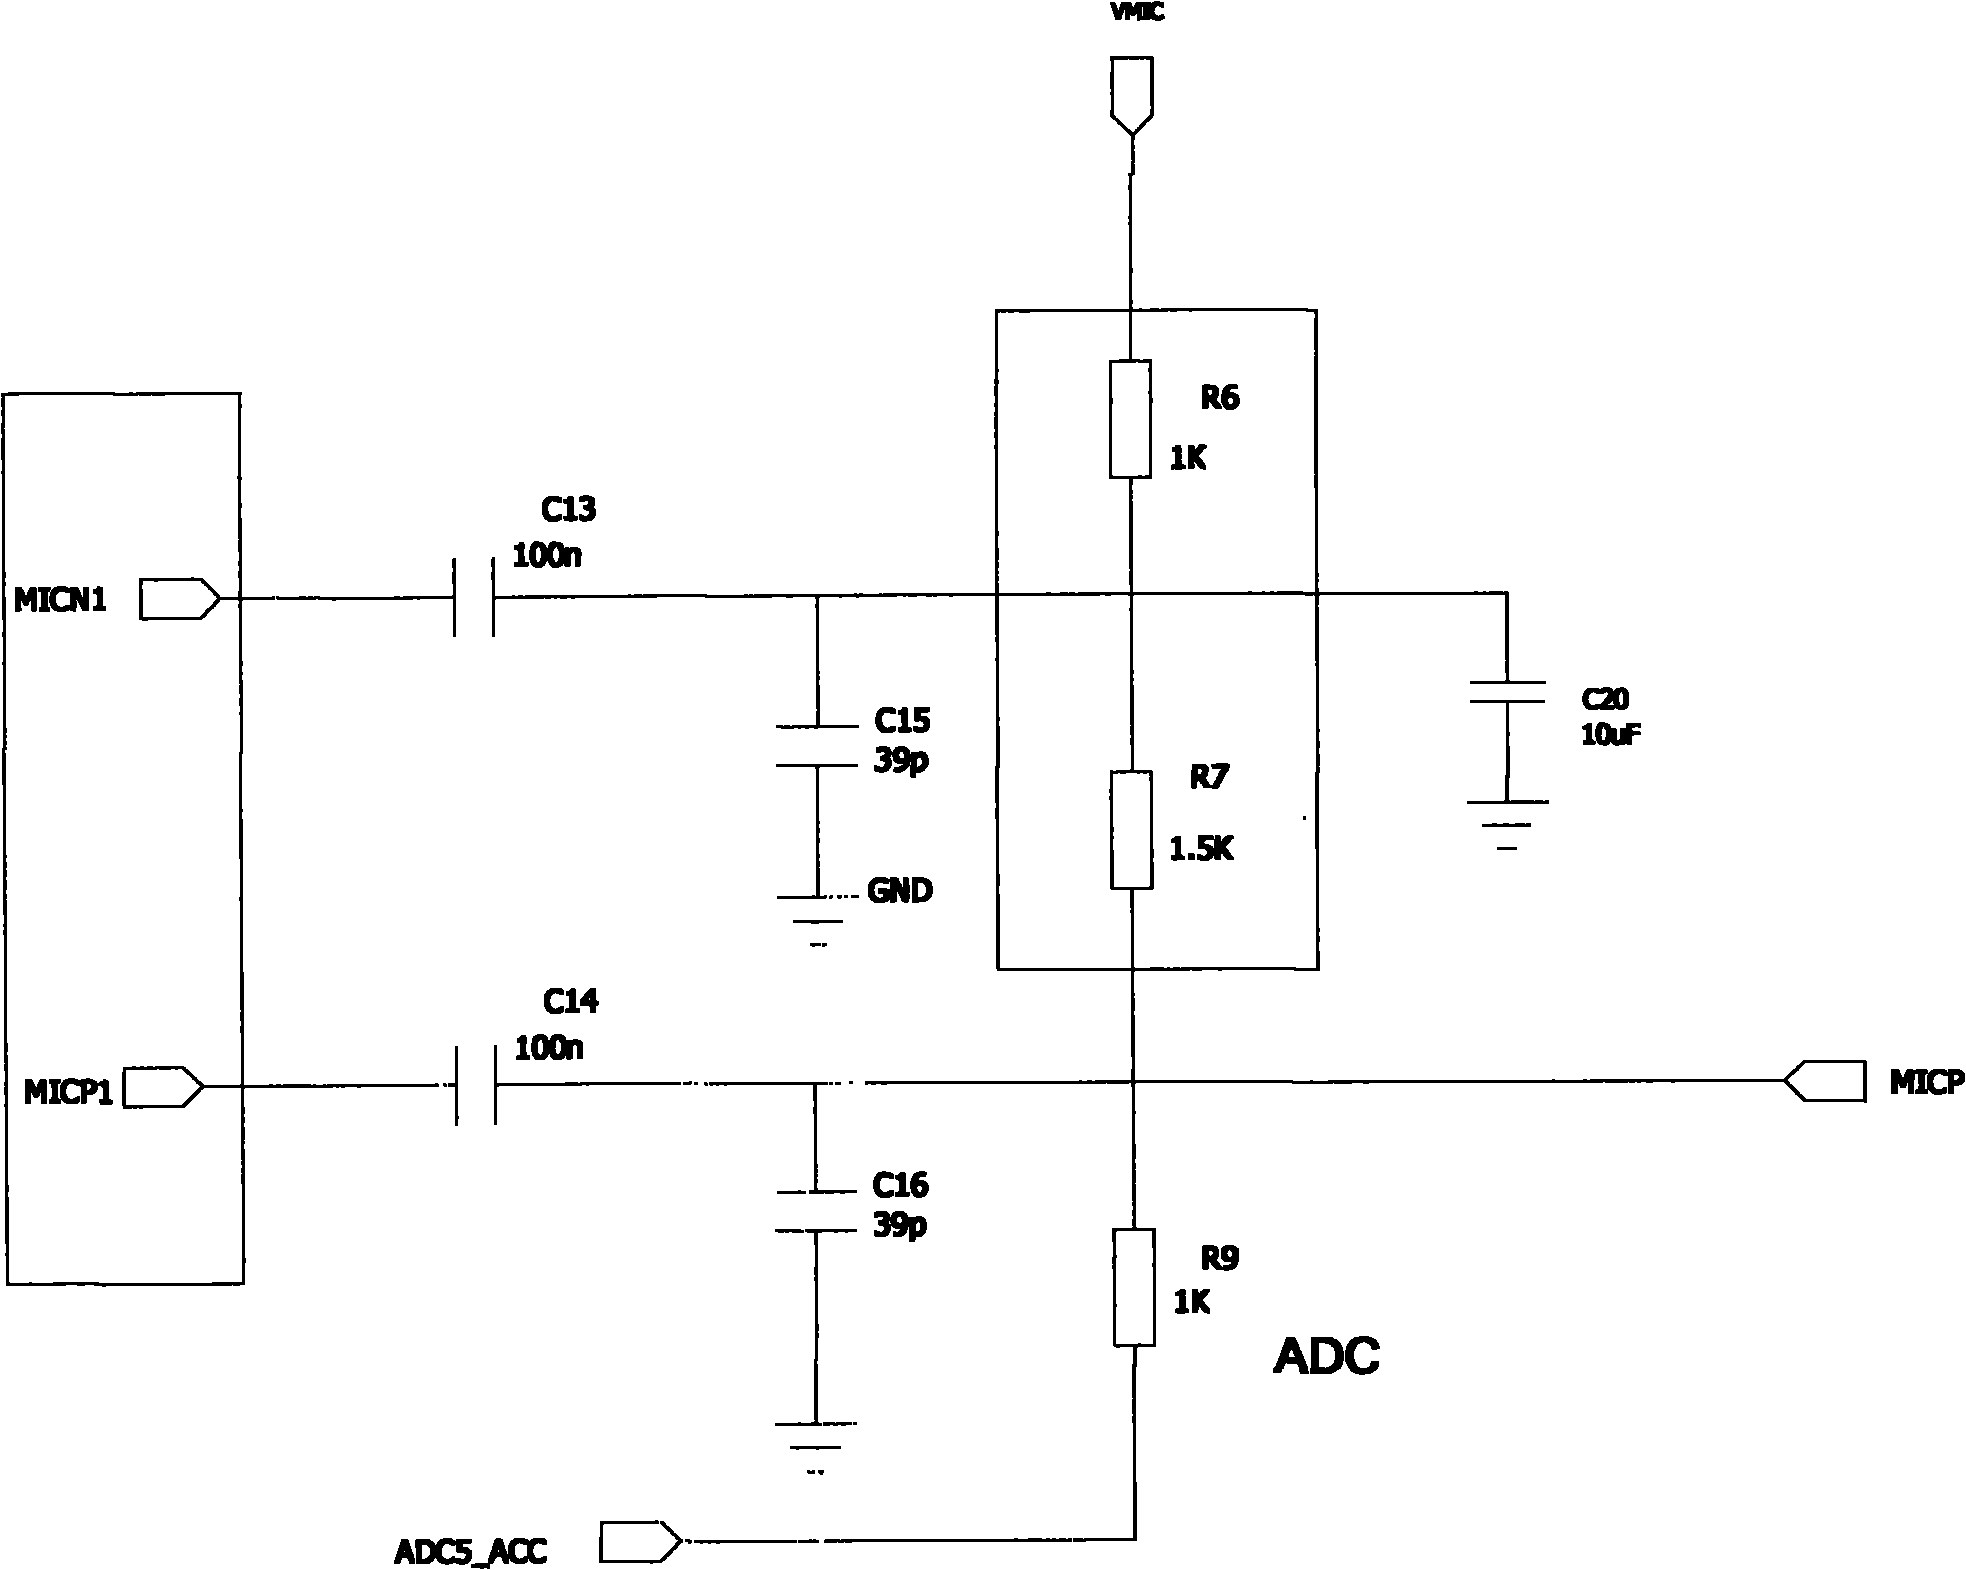 Drive-by-wire earphone for portable electronic equipment and method for realizing drive-by-wire